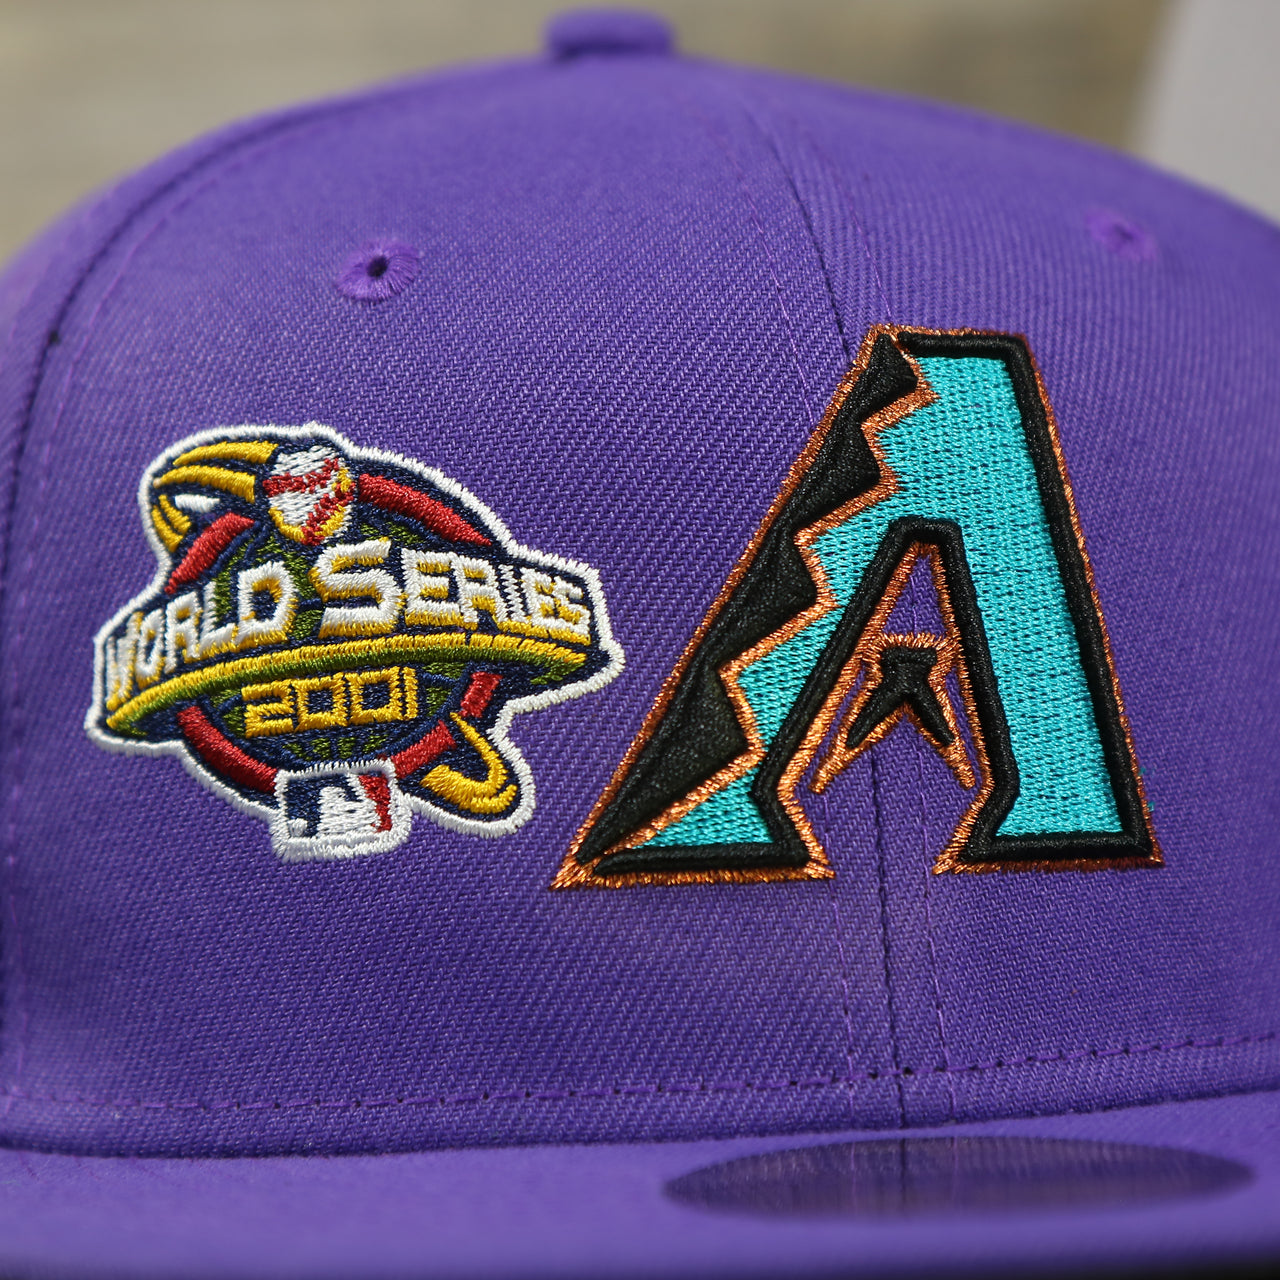 2001 world series patch and diamondbacks logo on the Arizona Diamondbacks Cooperstown All Over Side Patch "Historic Champs" Gray UV 59Fifty Fitted Cap | Purple 59Fifty Fitted Cap